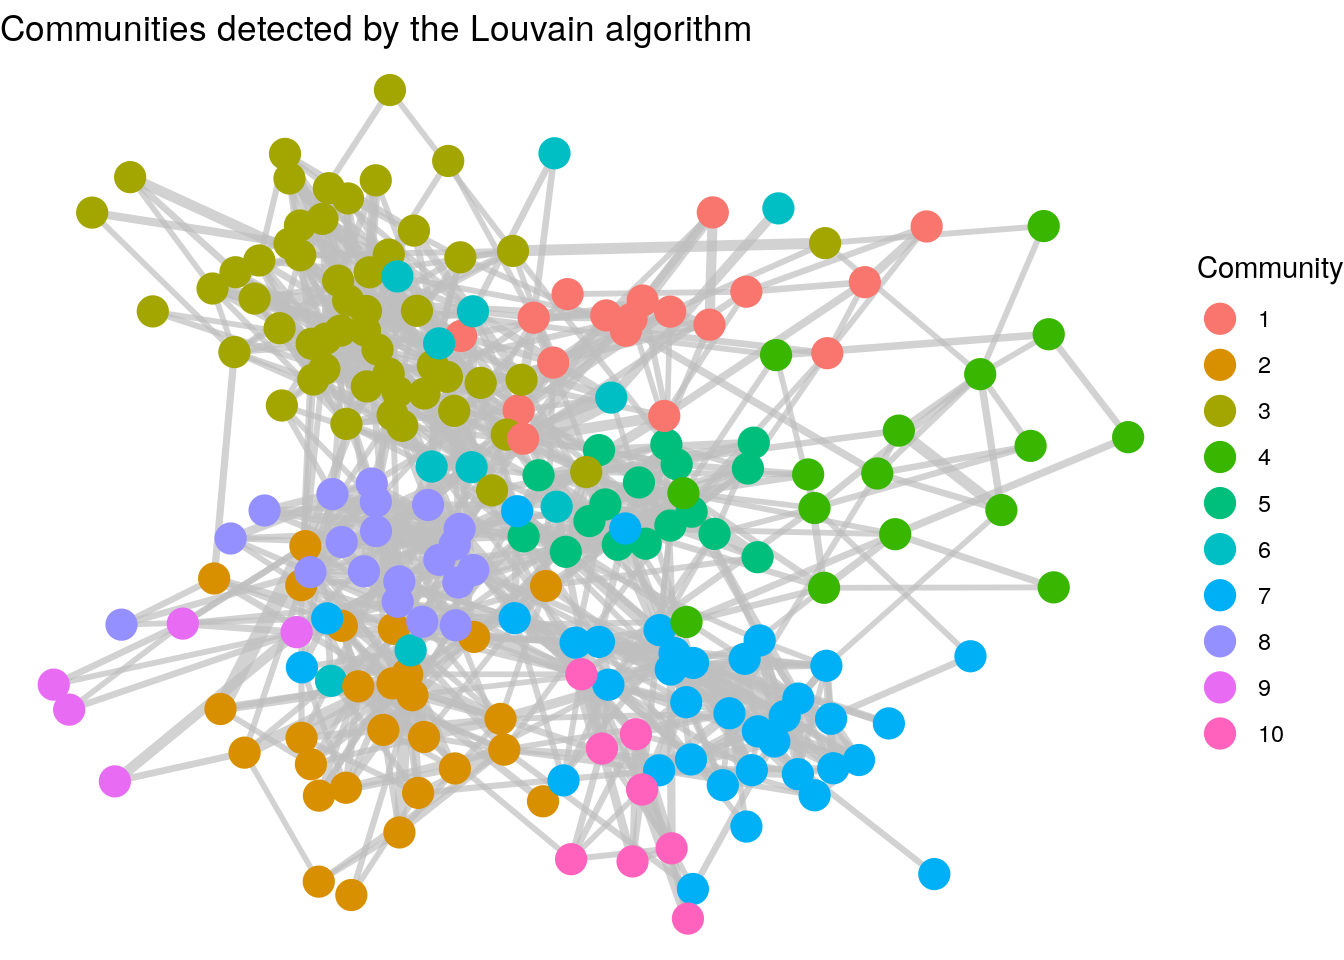 Clusters of employees as detected by the Louvain unsupervised community detection algorithm.  Note the cluster similarity of communities with the departments in the previous graph.